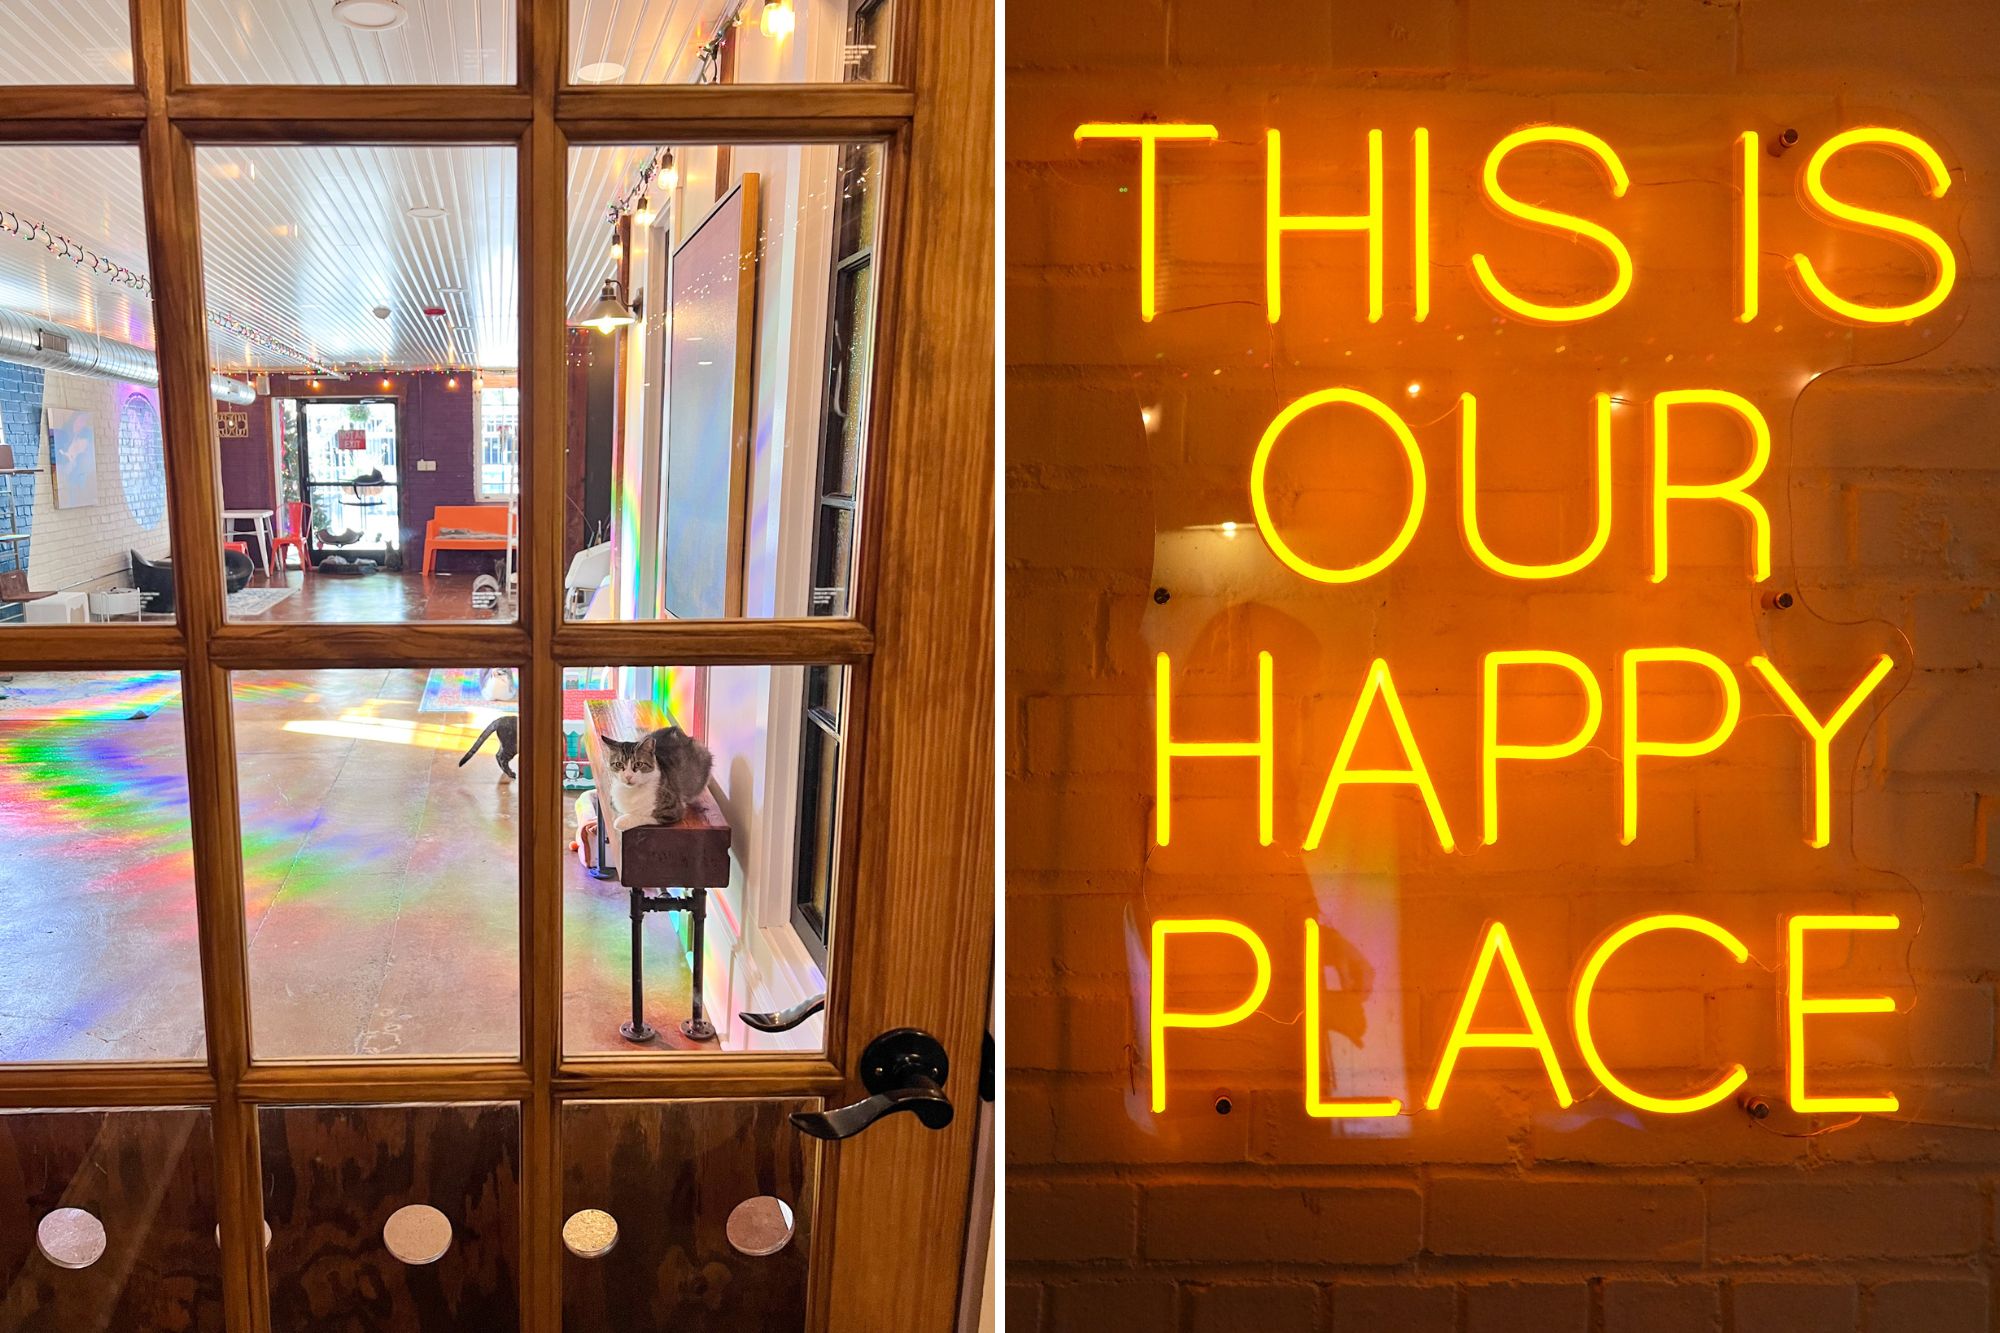 Two images: on the left is the cat room at Mac Tabby, and on the right is a neon sign that reads "This is our happy place'